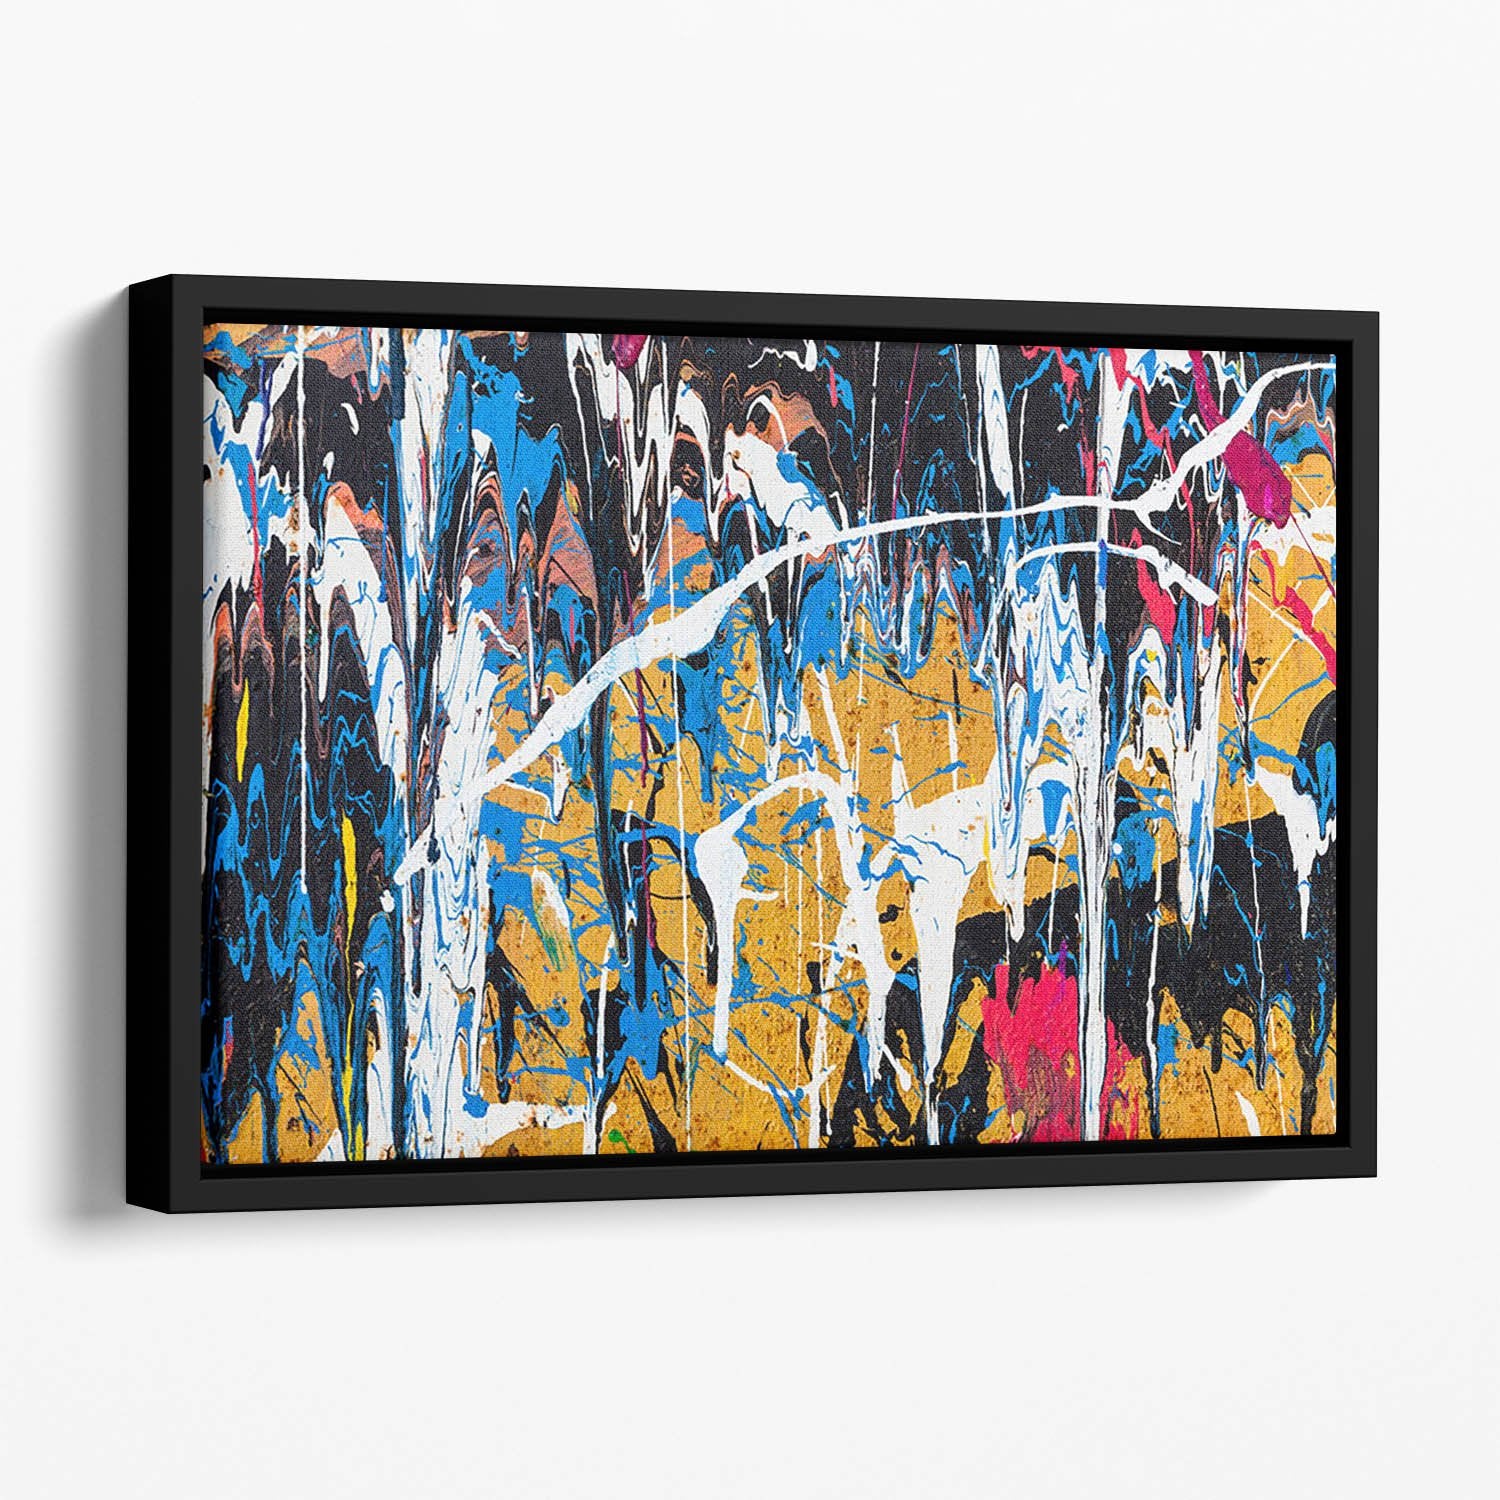 Dripping paint graffiti Floating Framed Canvas